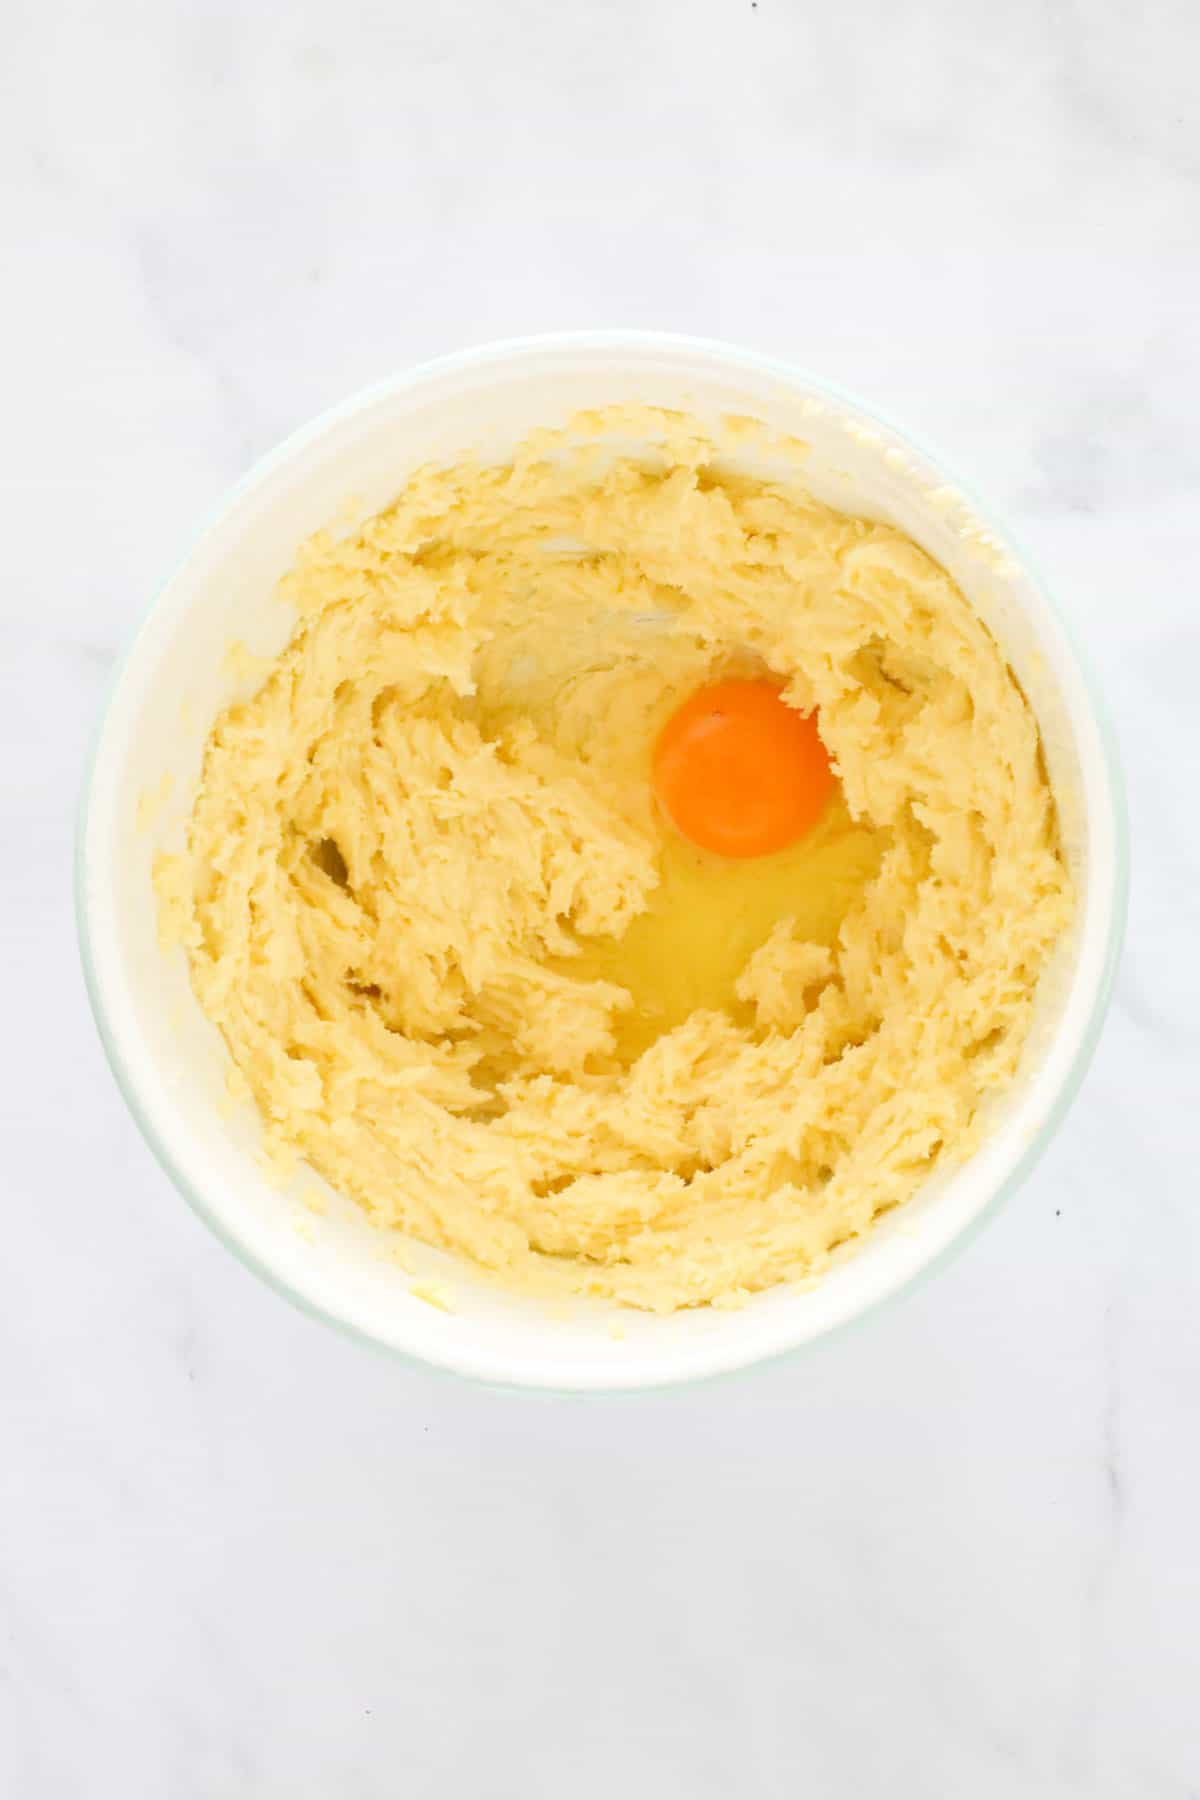 An egg added to creamed butter and sugar.